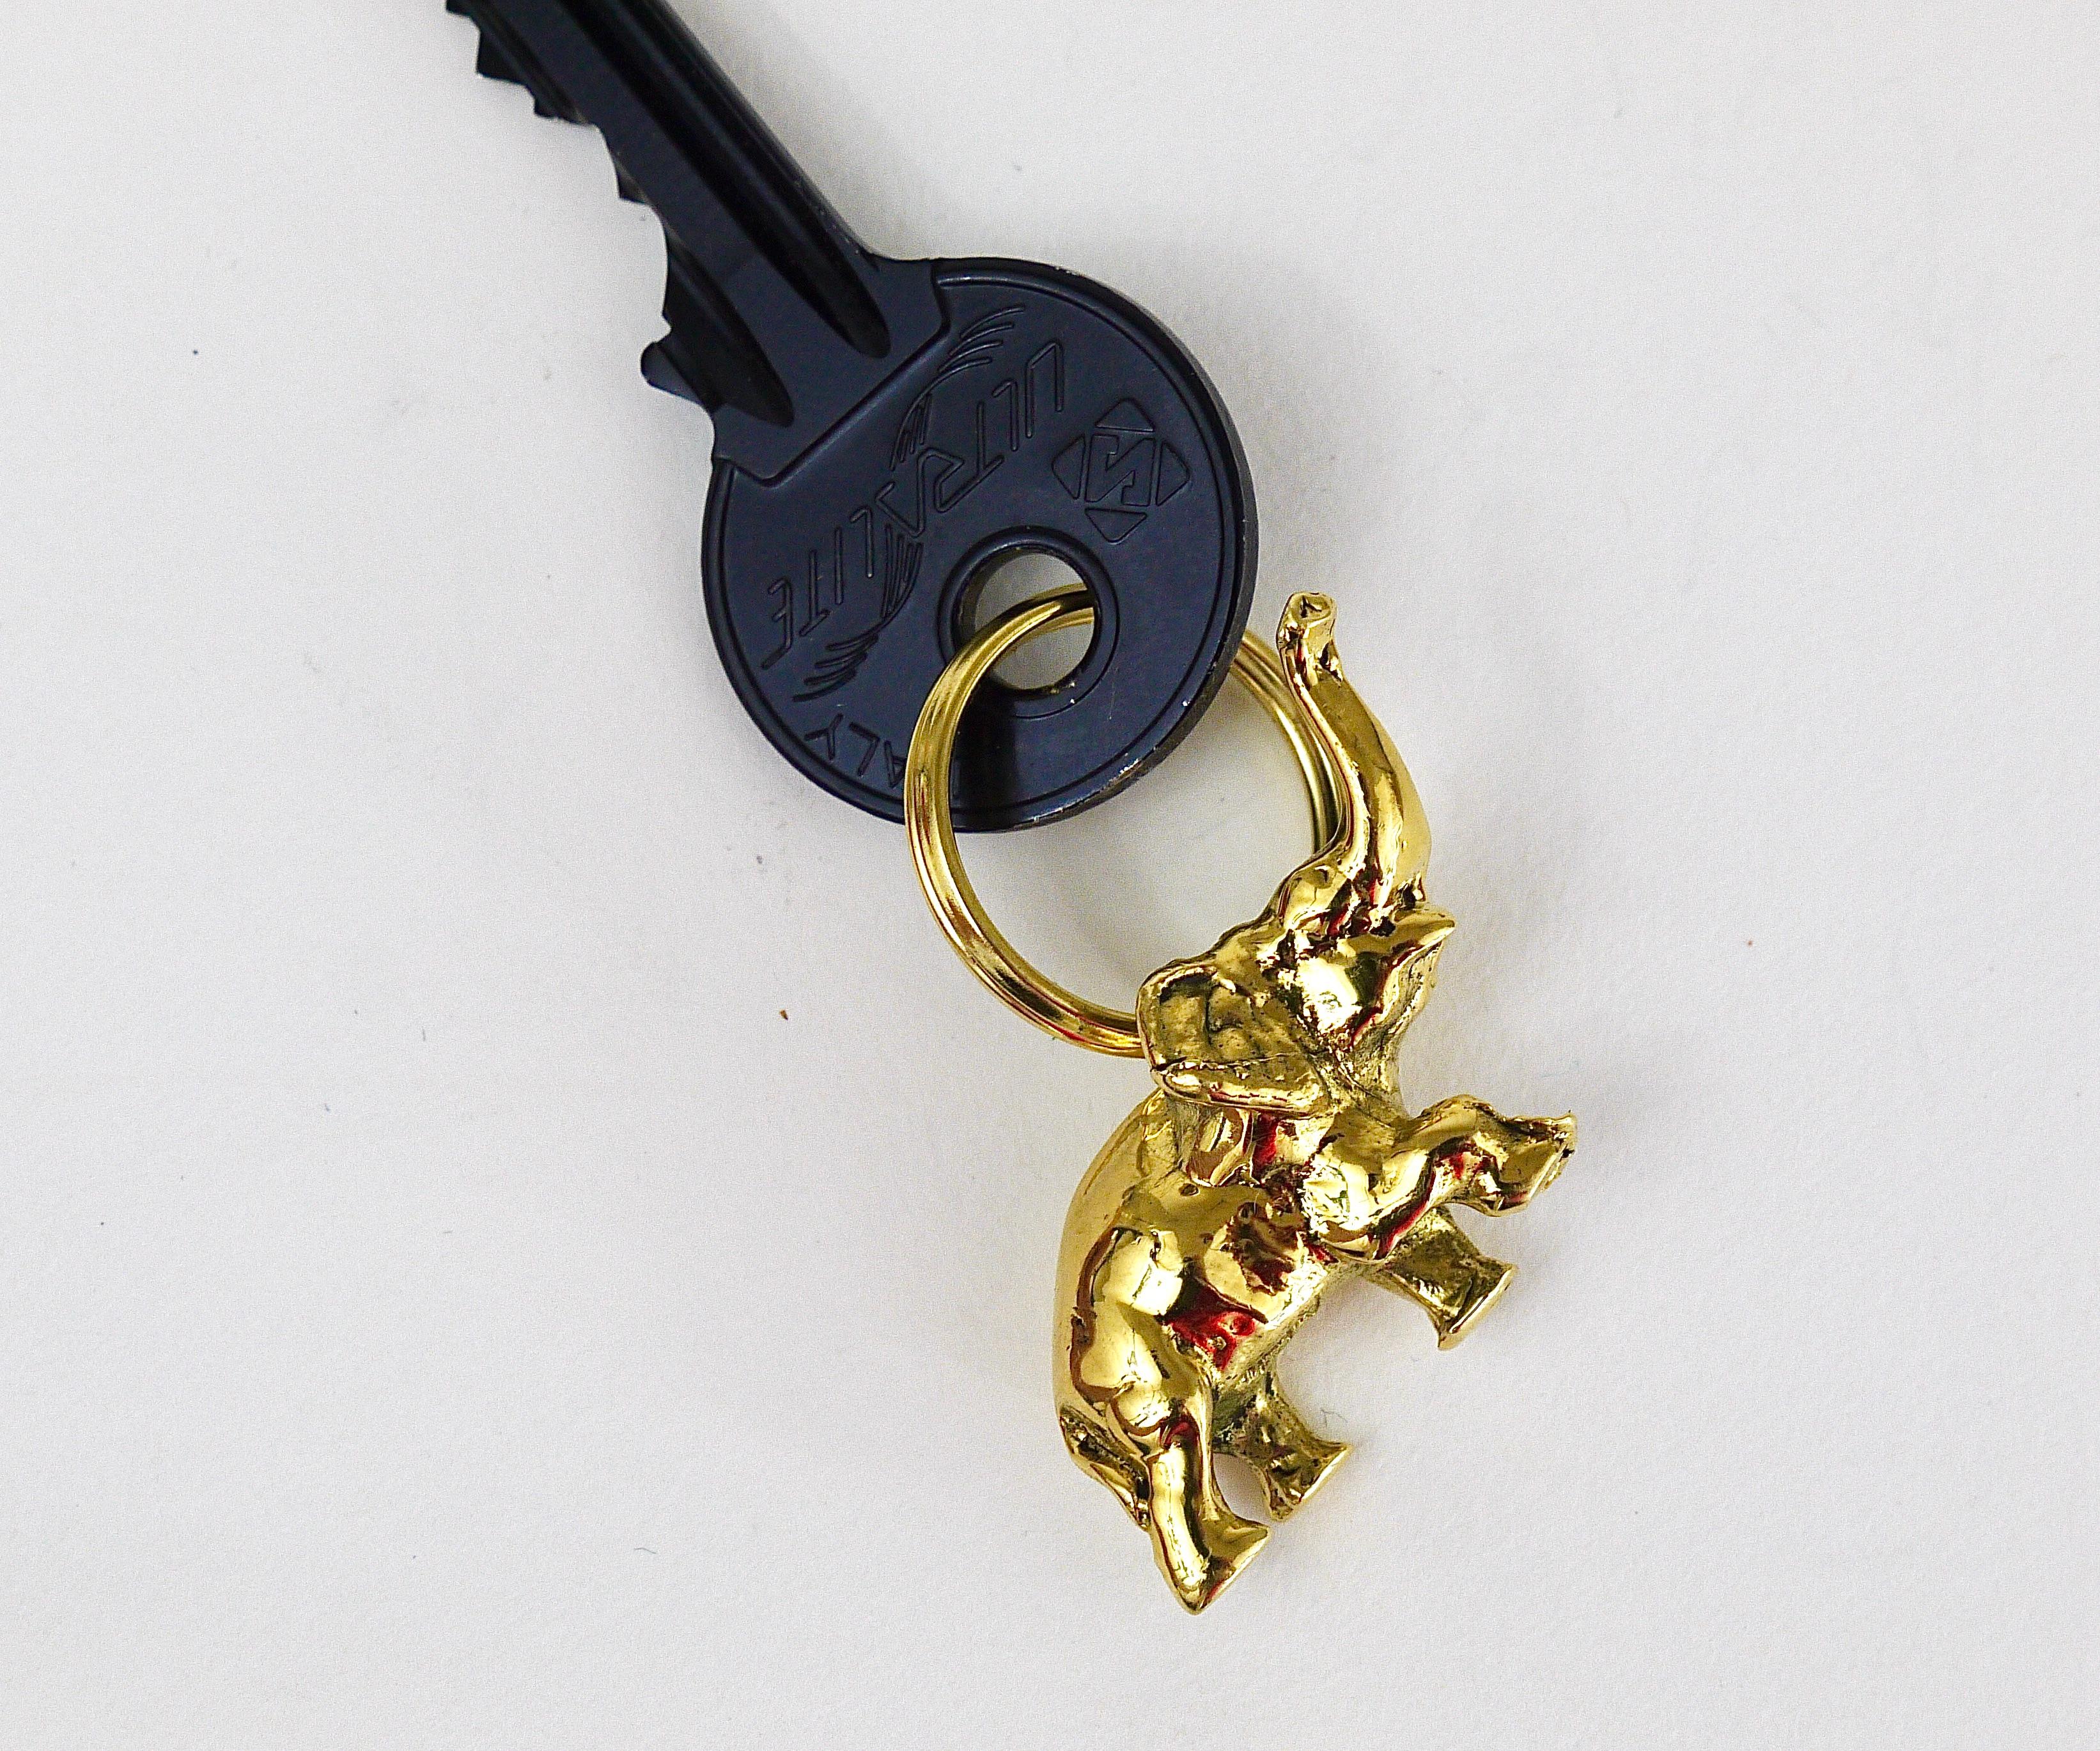 A charming modernist elephant keyring / keyholder / keychain, designed by Carl Auböck in the 1950s. Handmade of solid polished brass by Werkstätte Auböck in Austria. Fully stamped and marked.

Measure: Length: appr. 1 1/2 inches

This is a